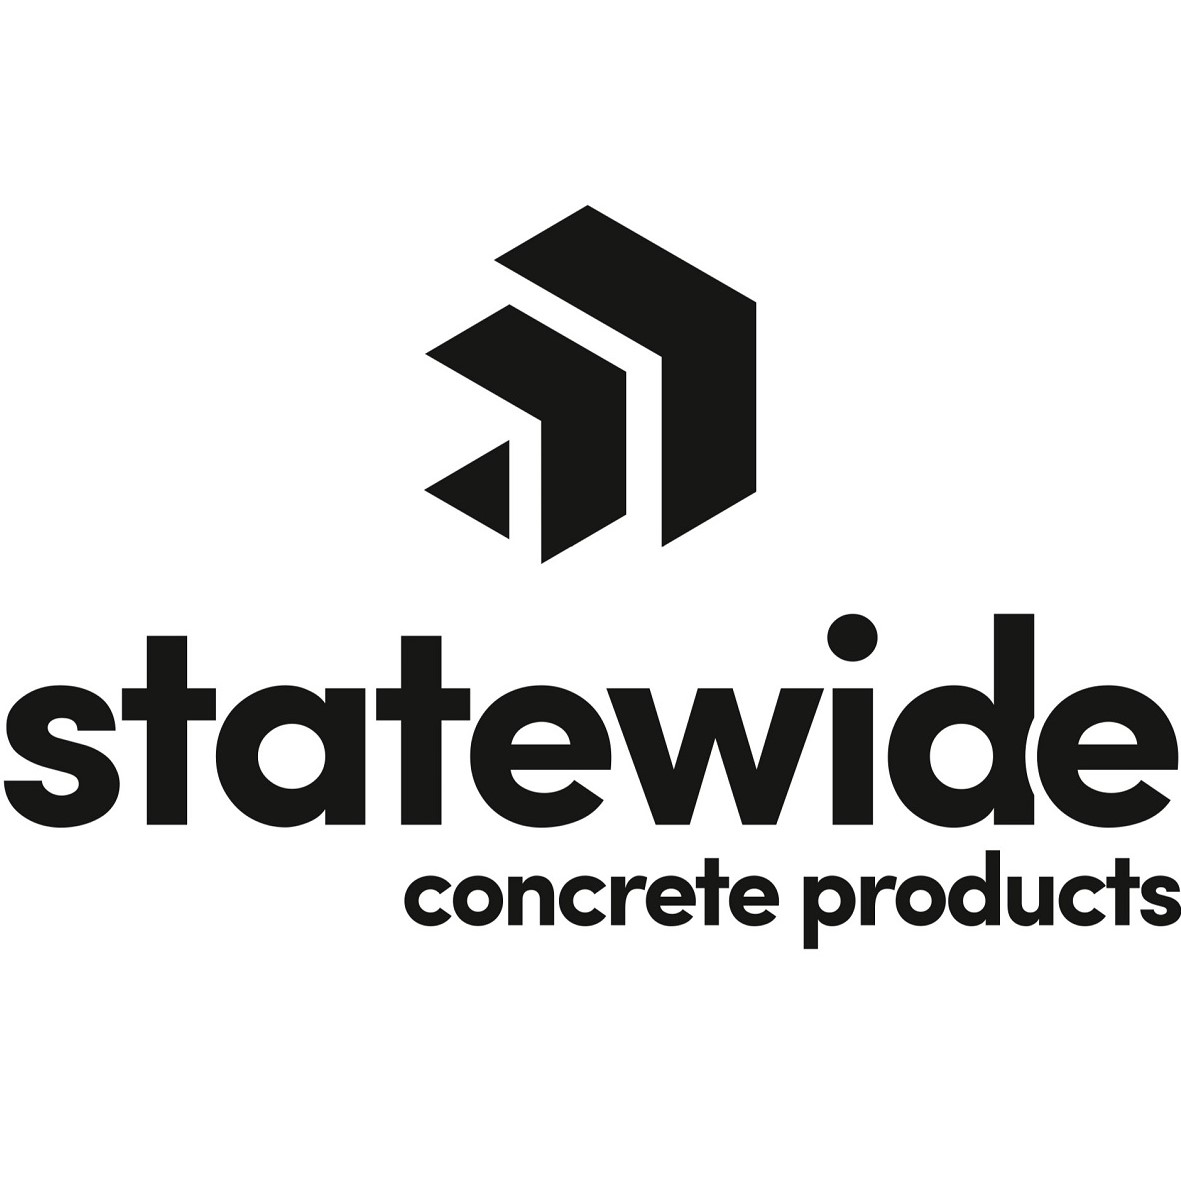 Statewide Concrete Products As Seen In The Block